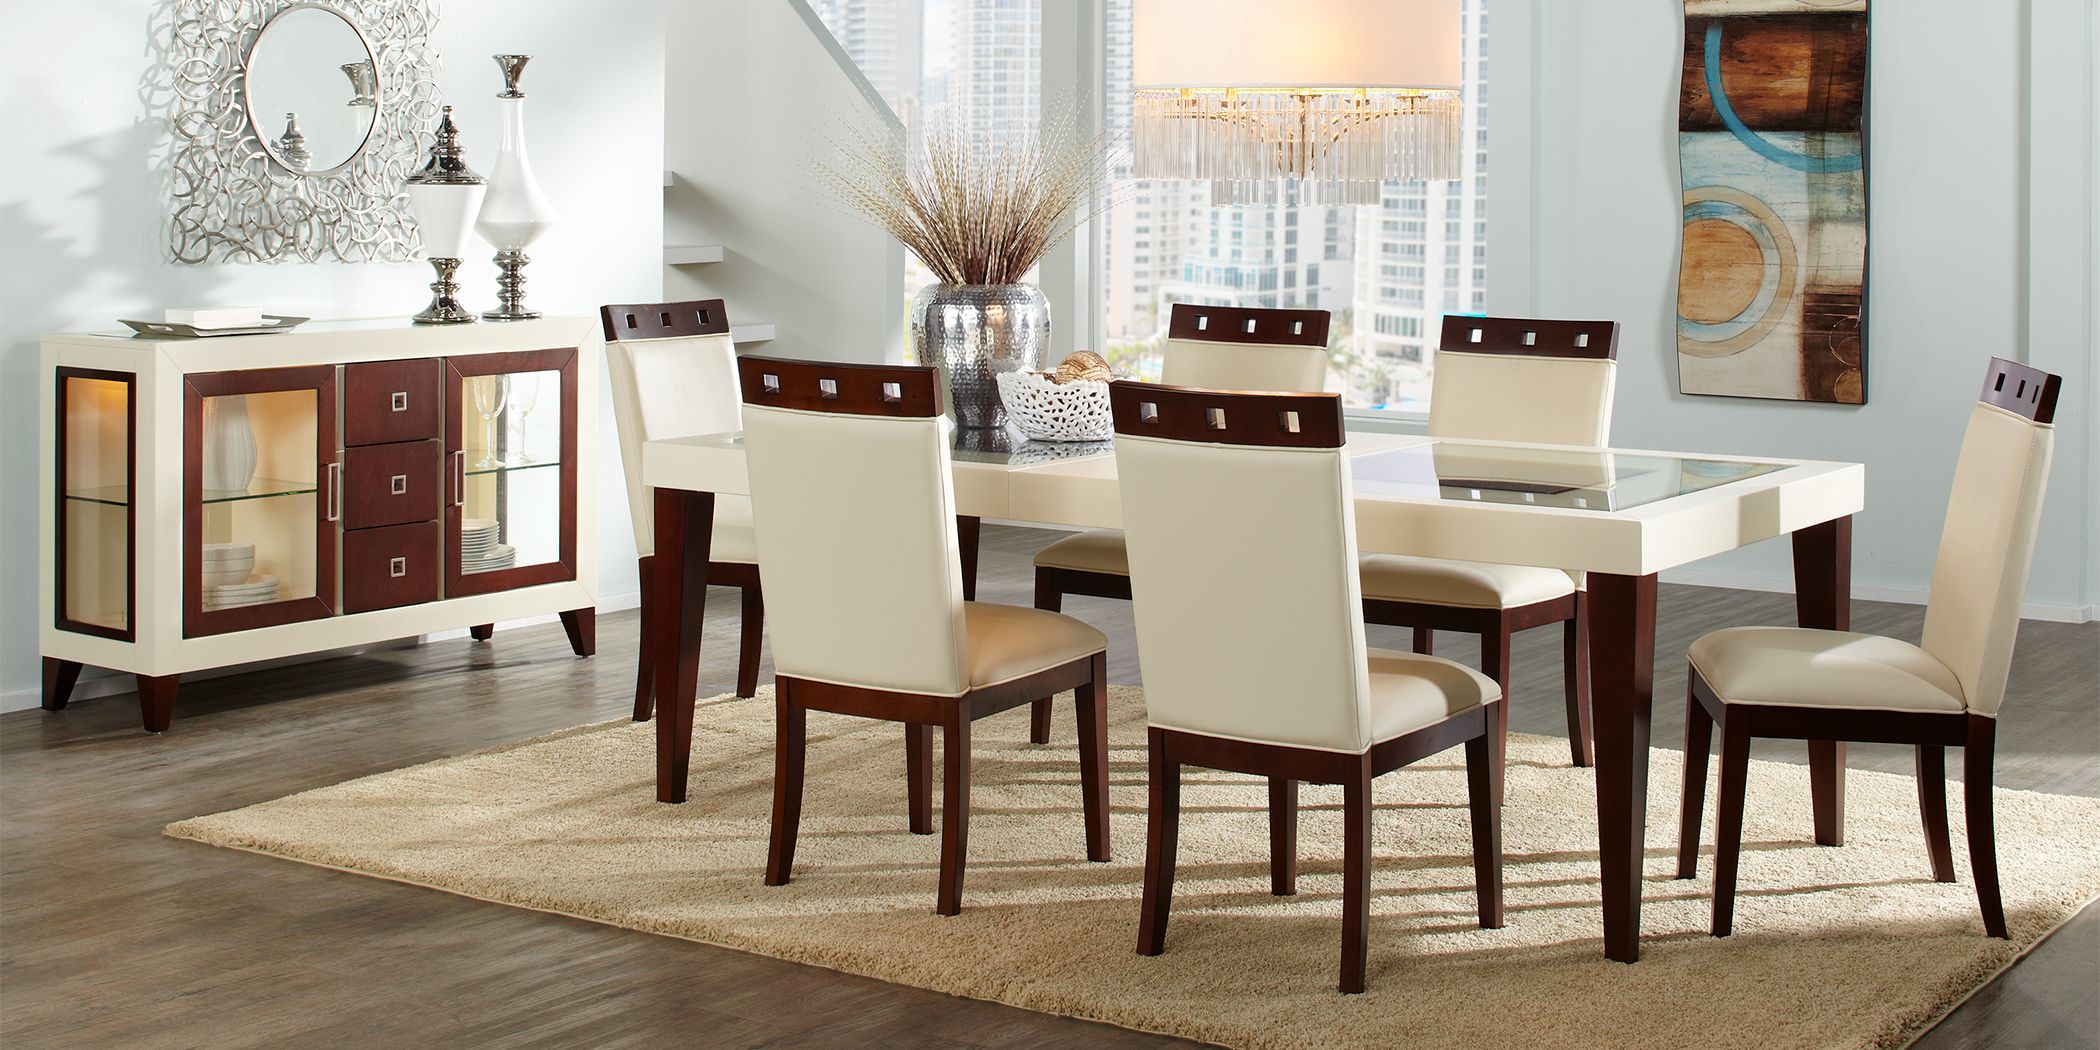 Rooms To Go Dining Room Sets On, Rooms To Go Furniture Dining Room Chairs